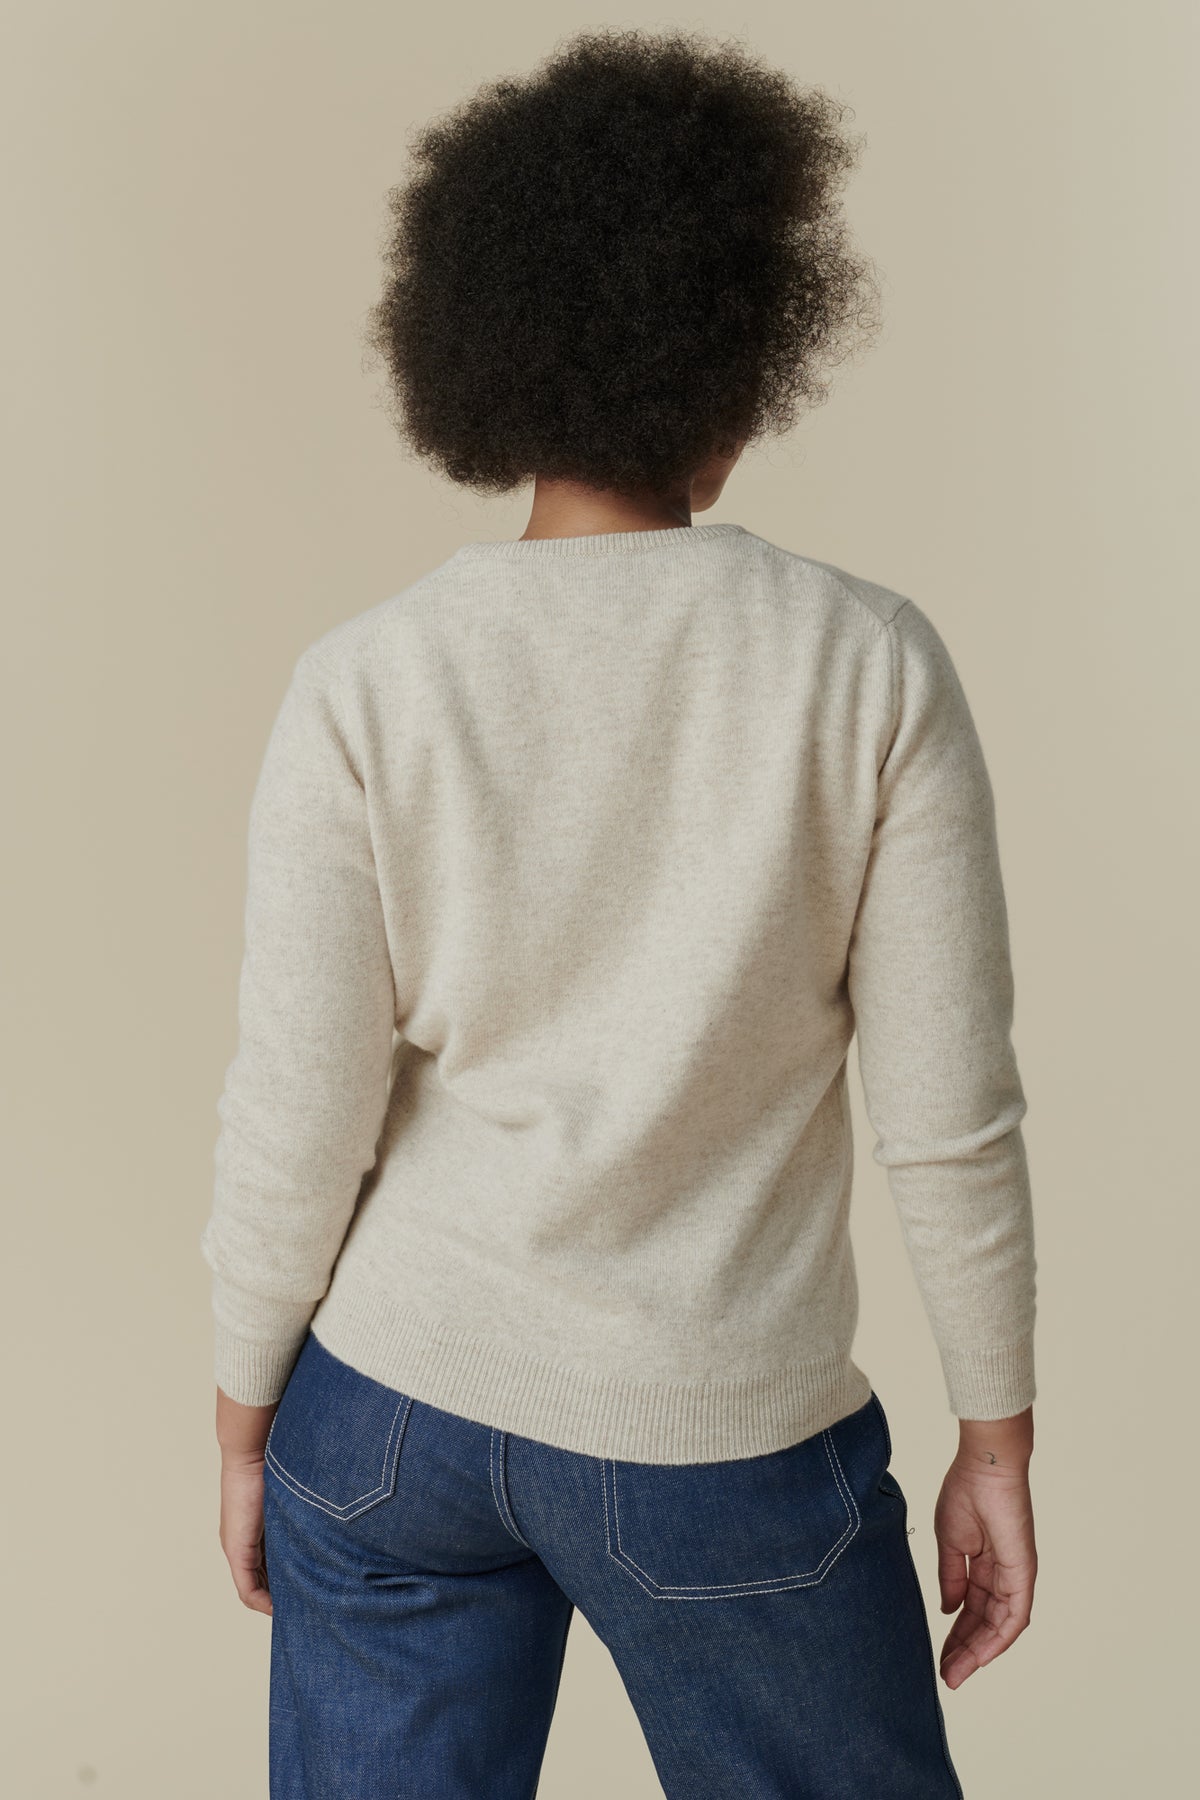 
            Thigh up image of back of female wearing lambswool crew neck jumper in linen